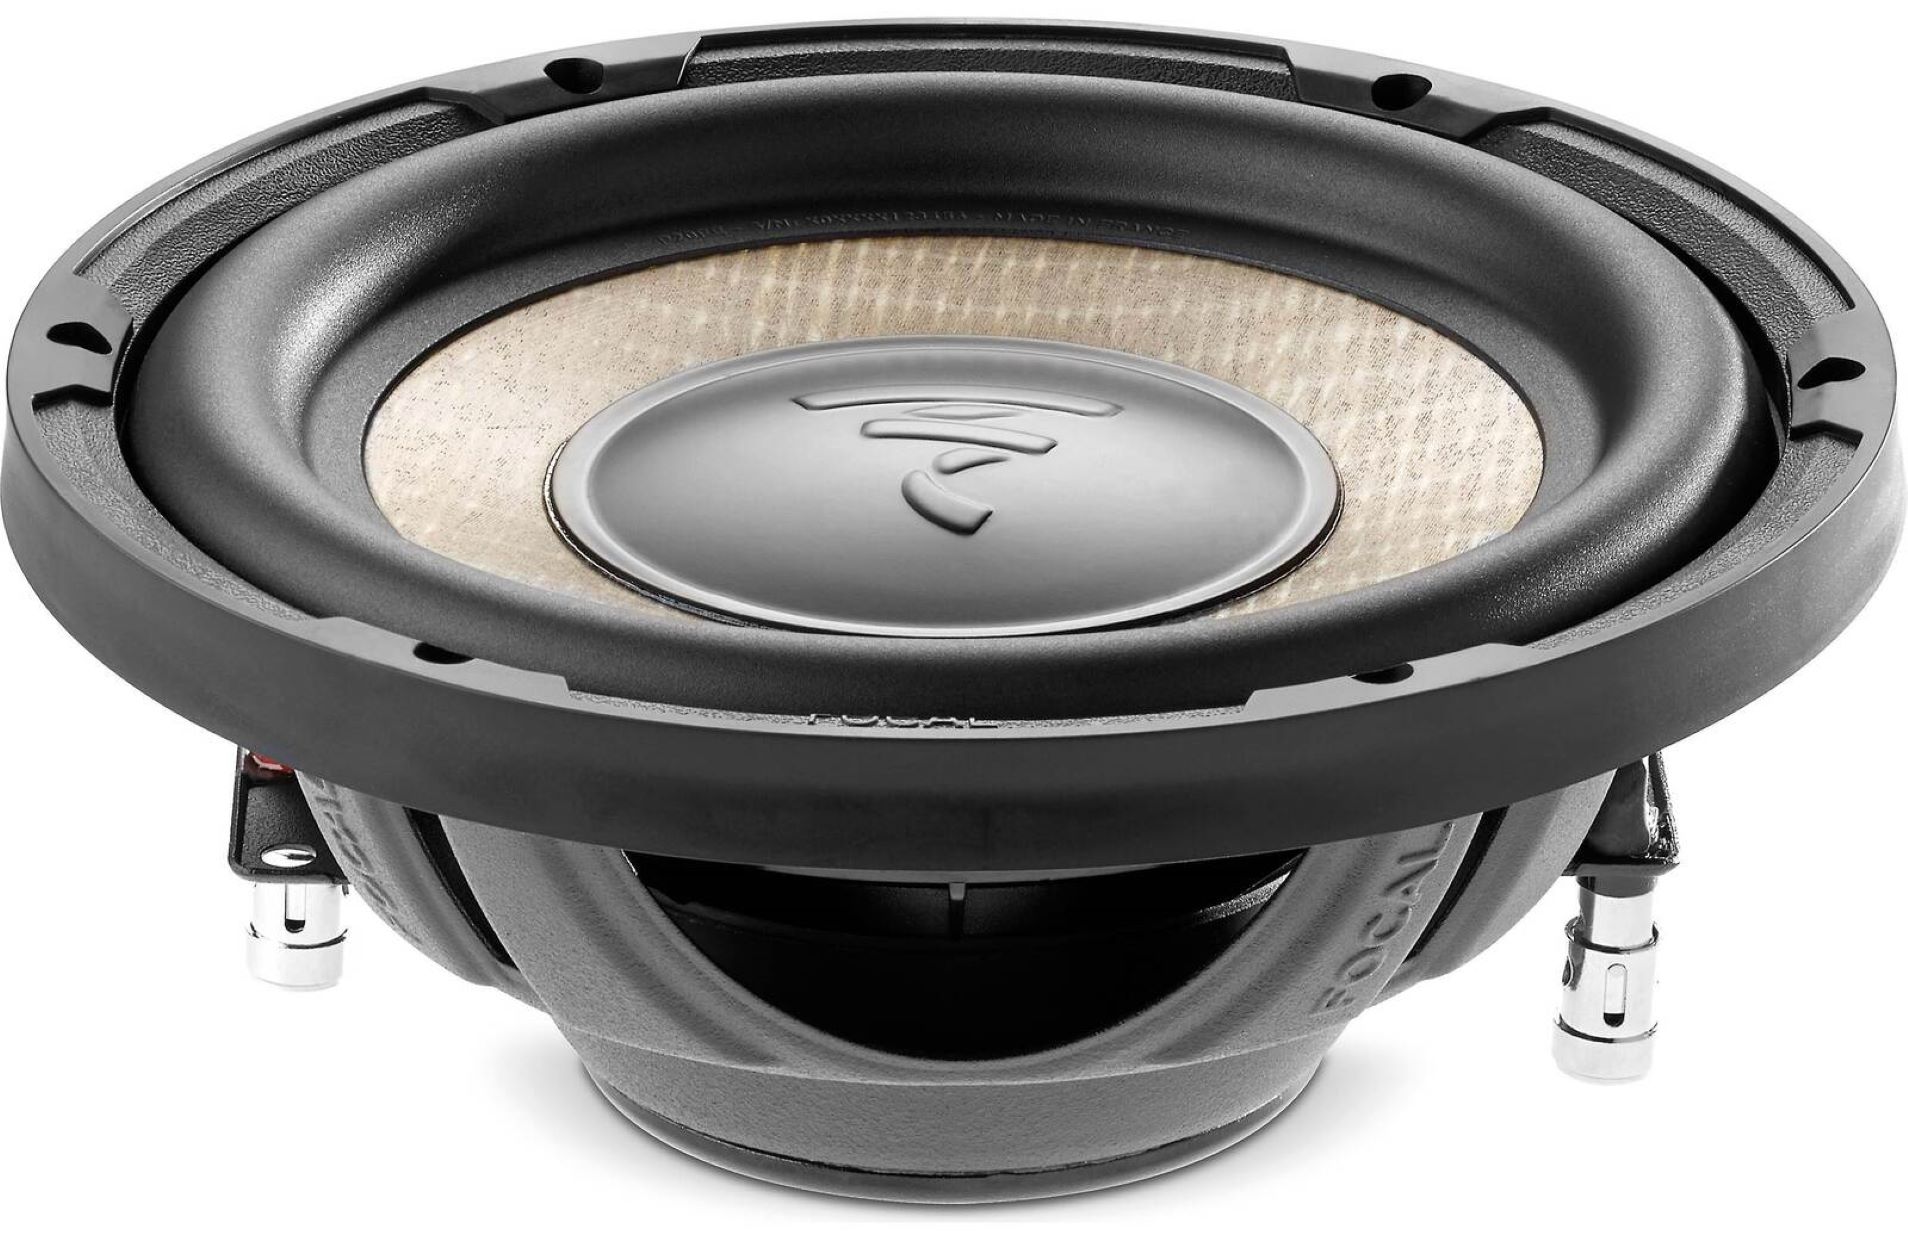 What Is The Best Shallow Subwoofer